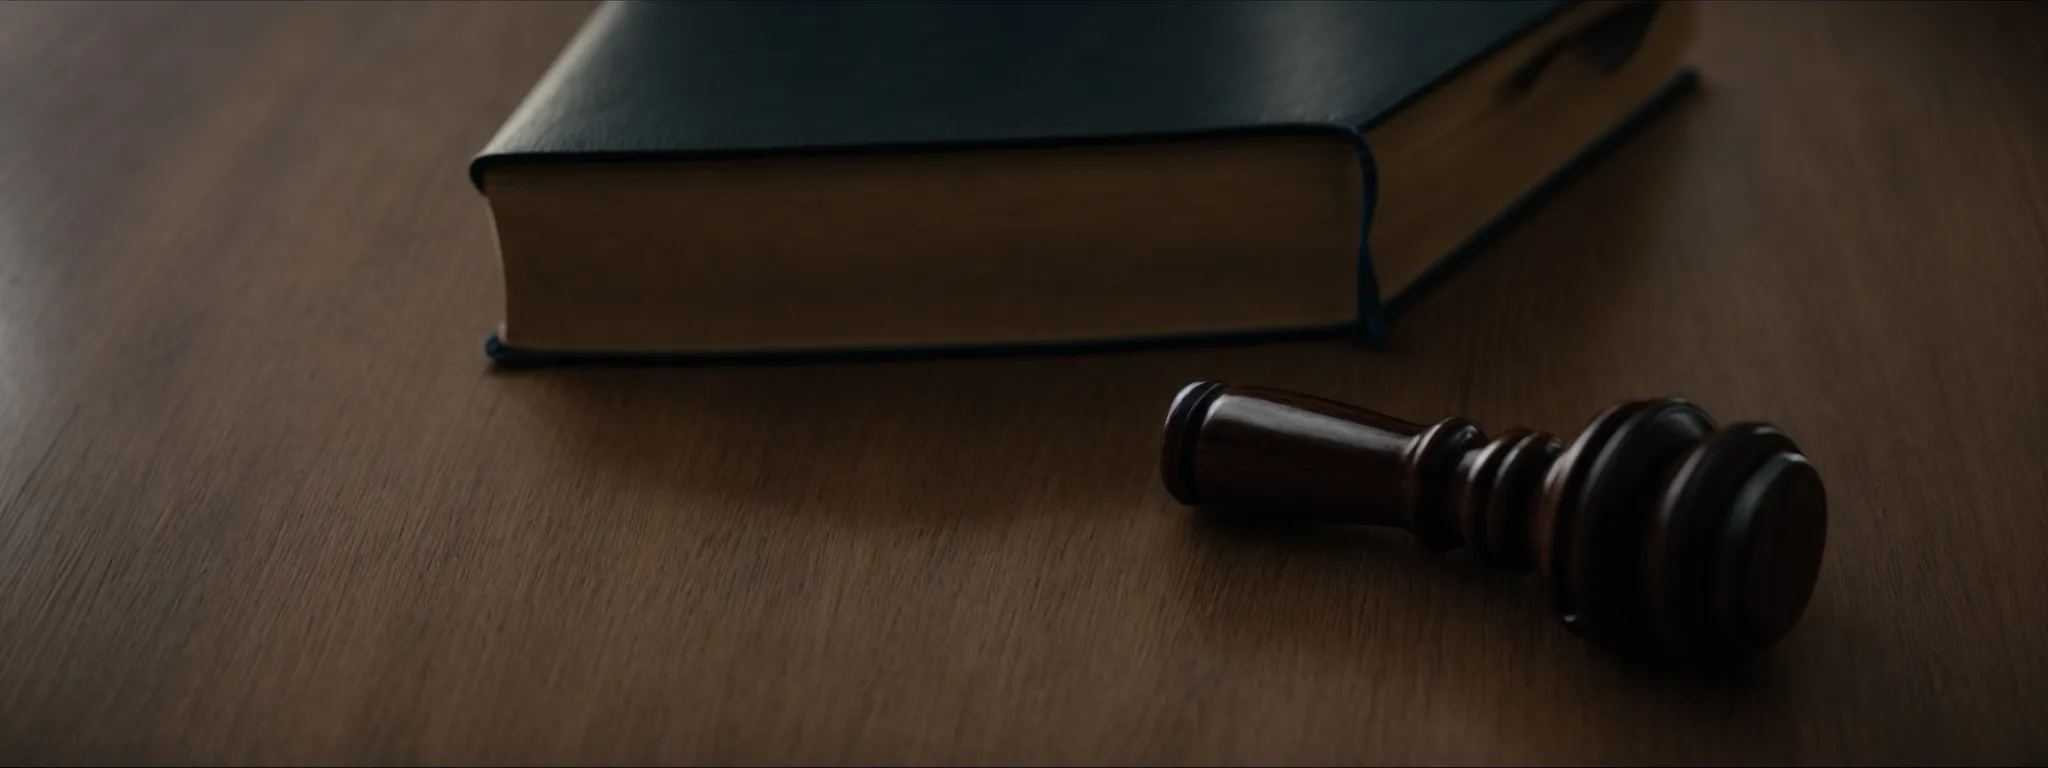 a judge's gavel and legal books on a polished wooden table as a metaphor for authoritative legal presence online.